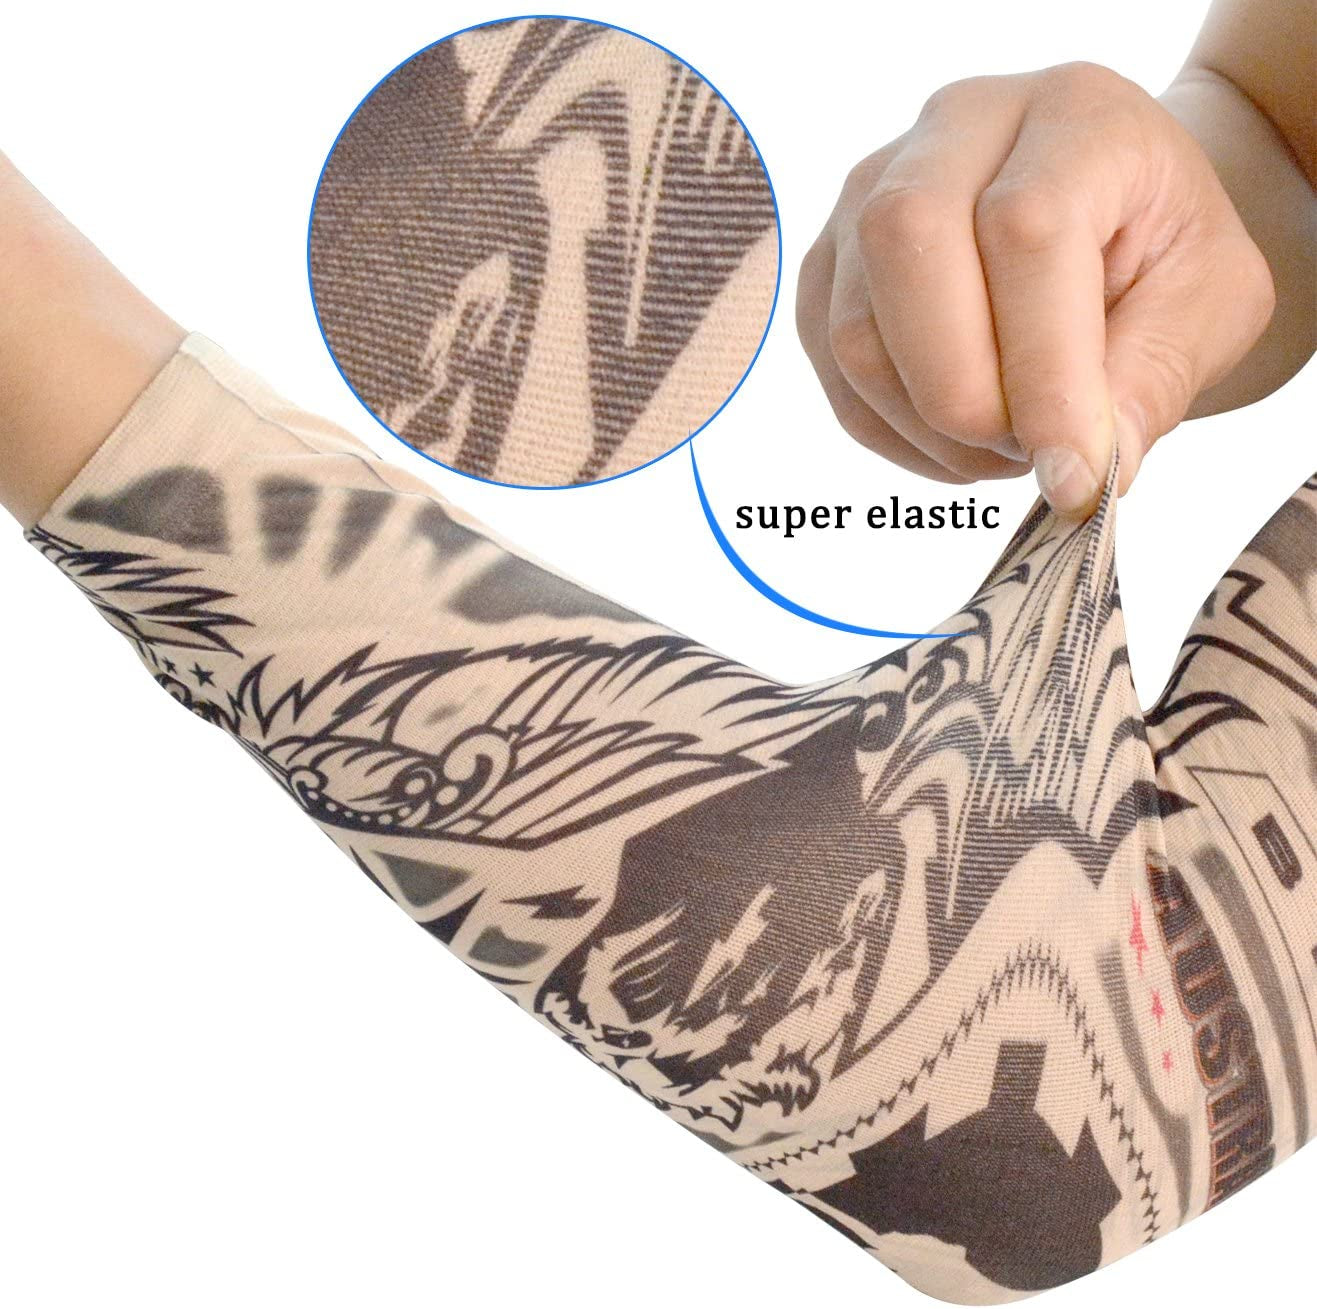 20pcs Temporary Tattoo Arm Sleeves Arts Fake Slip on Arm Sunscreen Sleeves Unisex Stretchable A